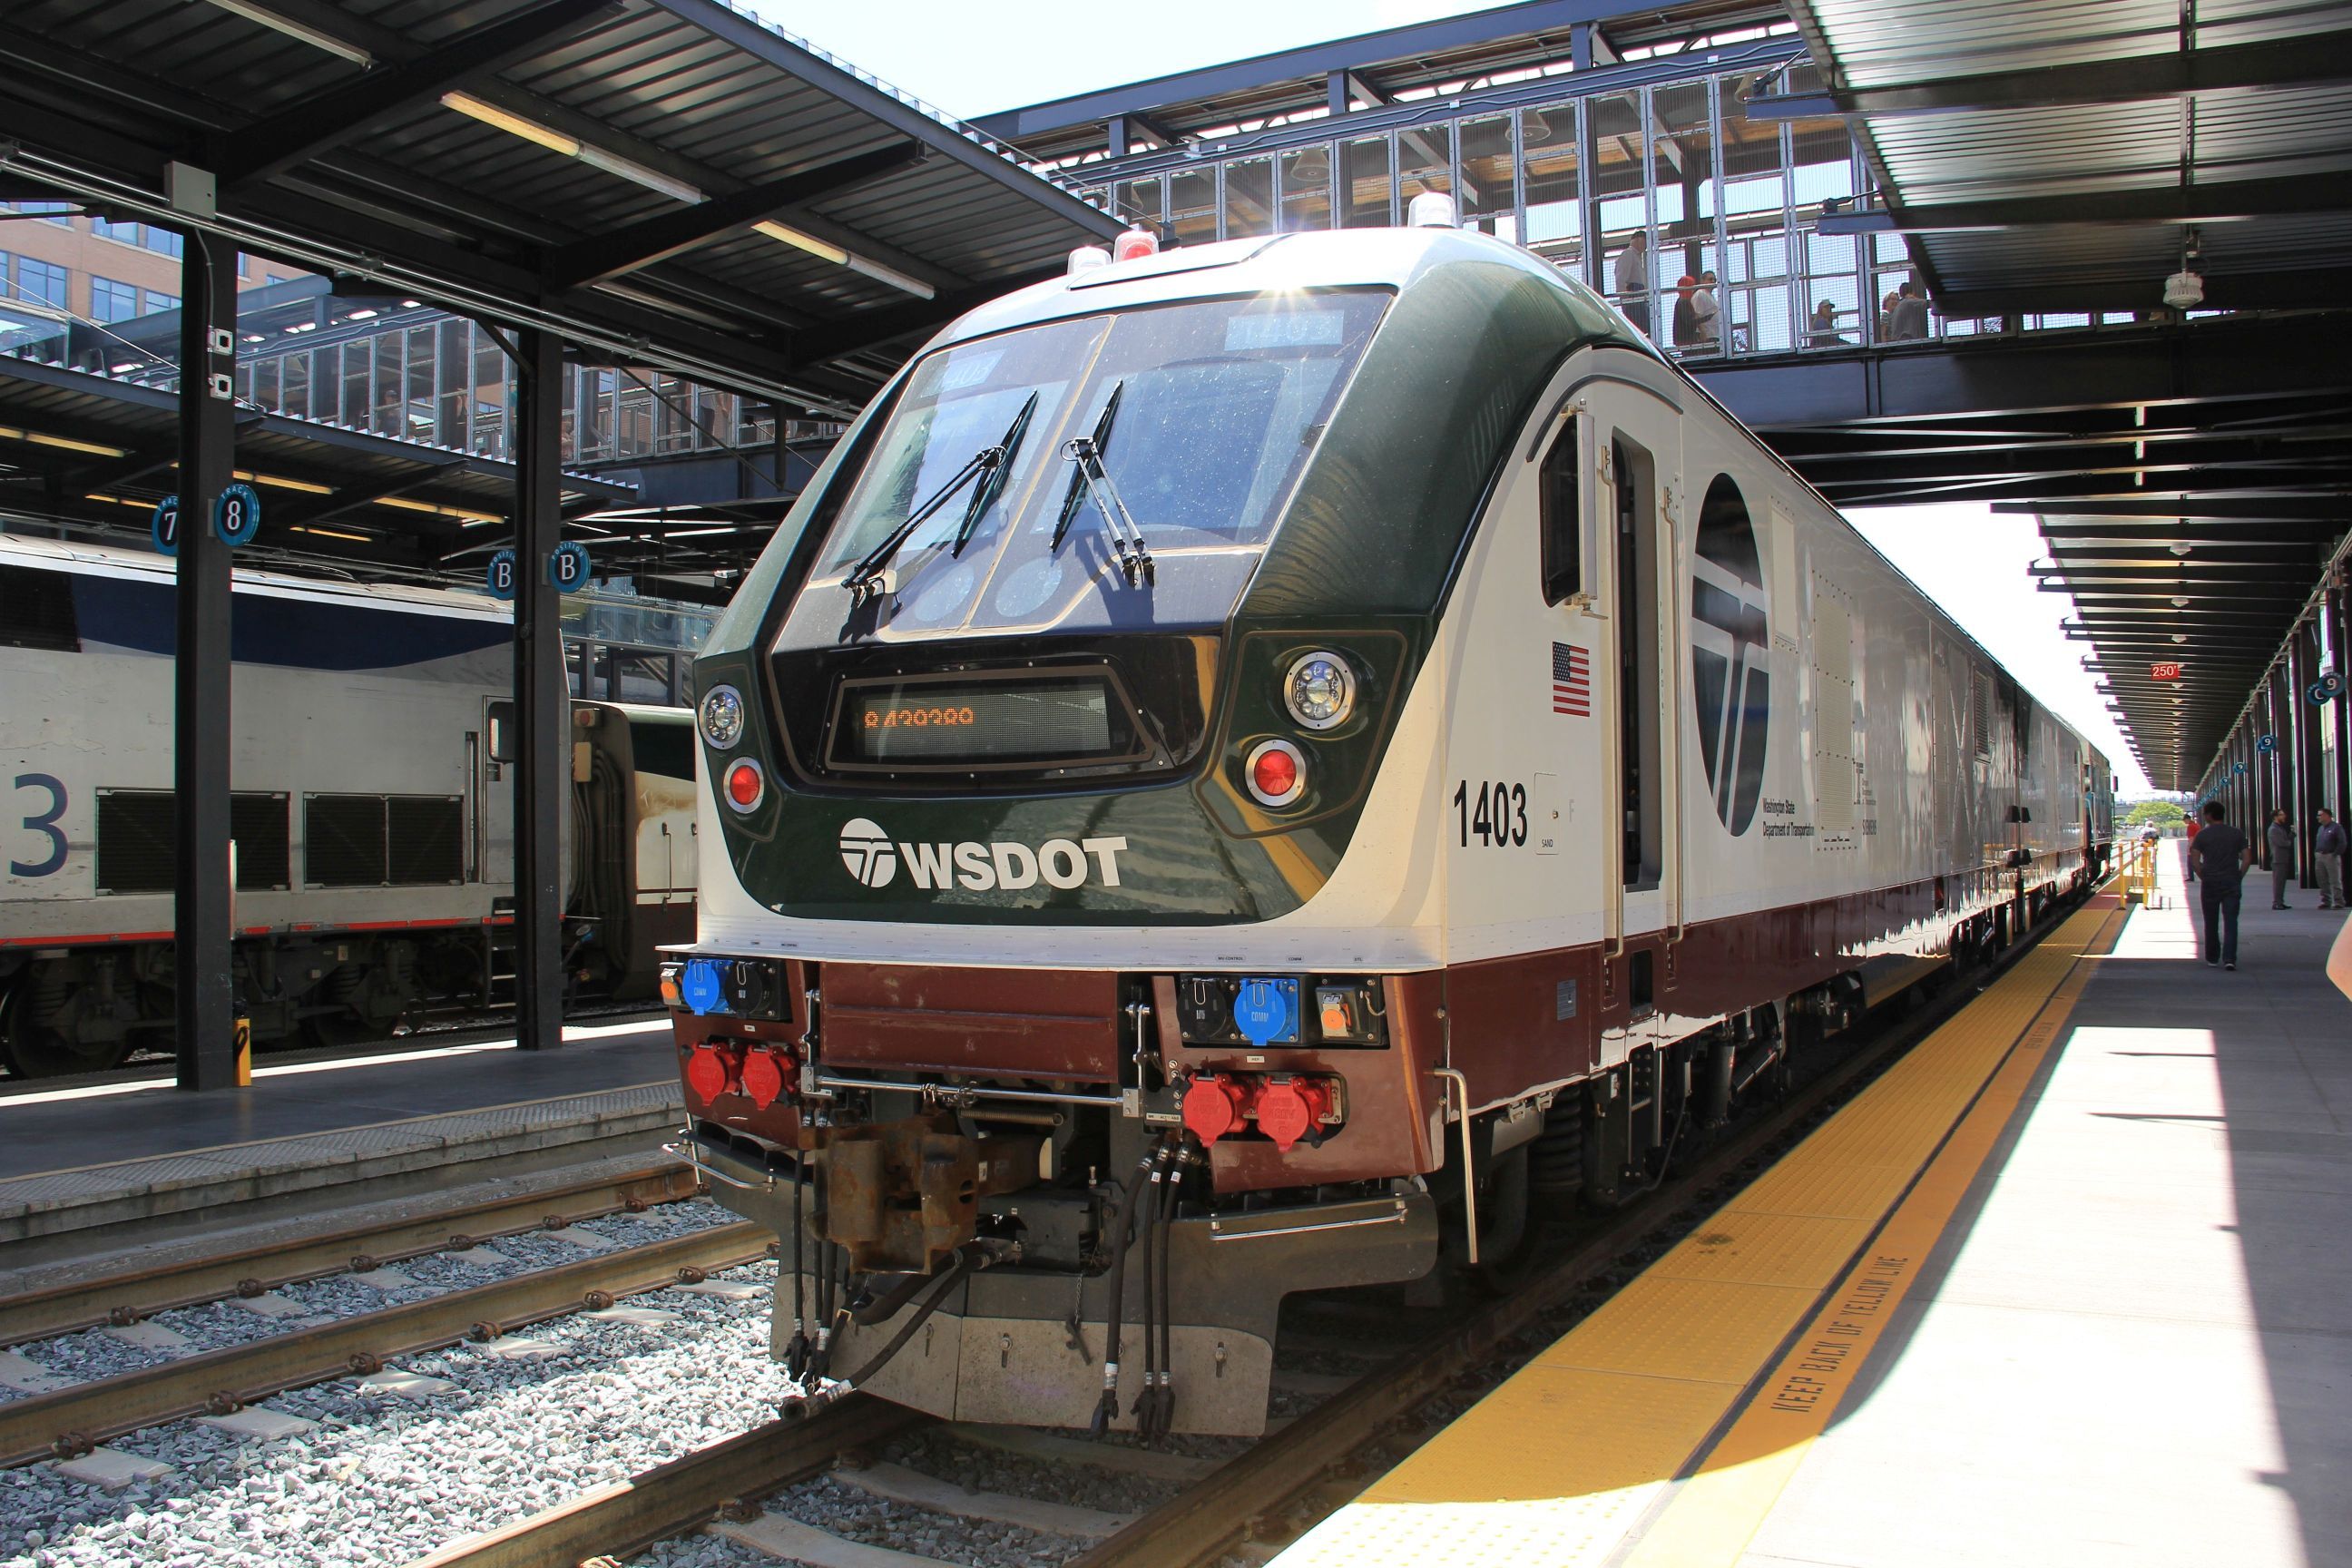 The front of a train at a platform, with the train reading "WSDOT" on the front. 